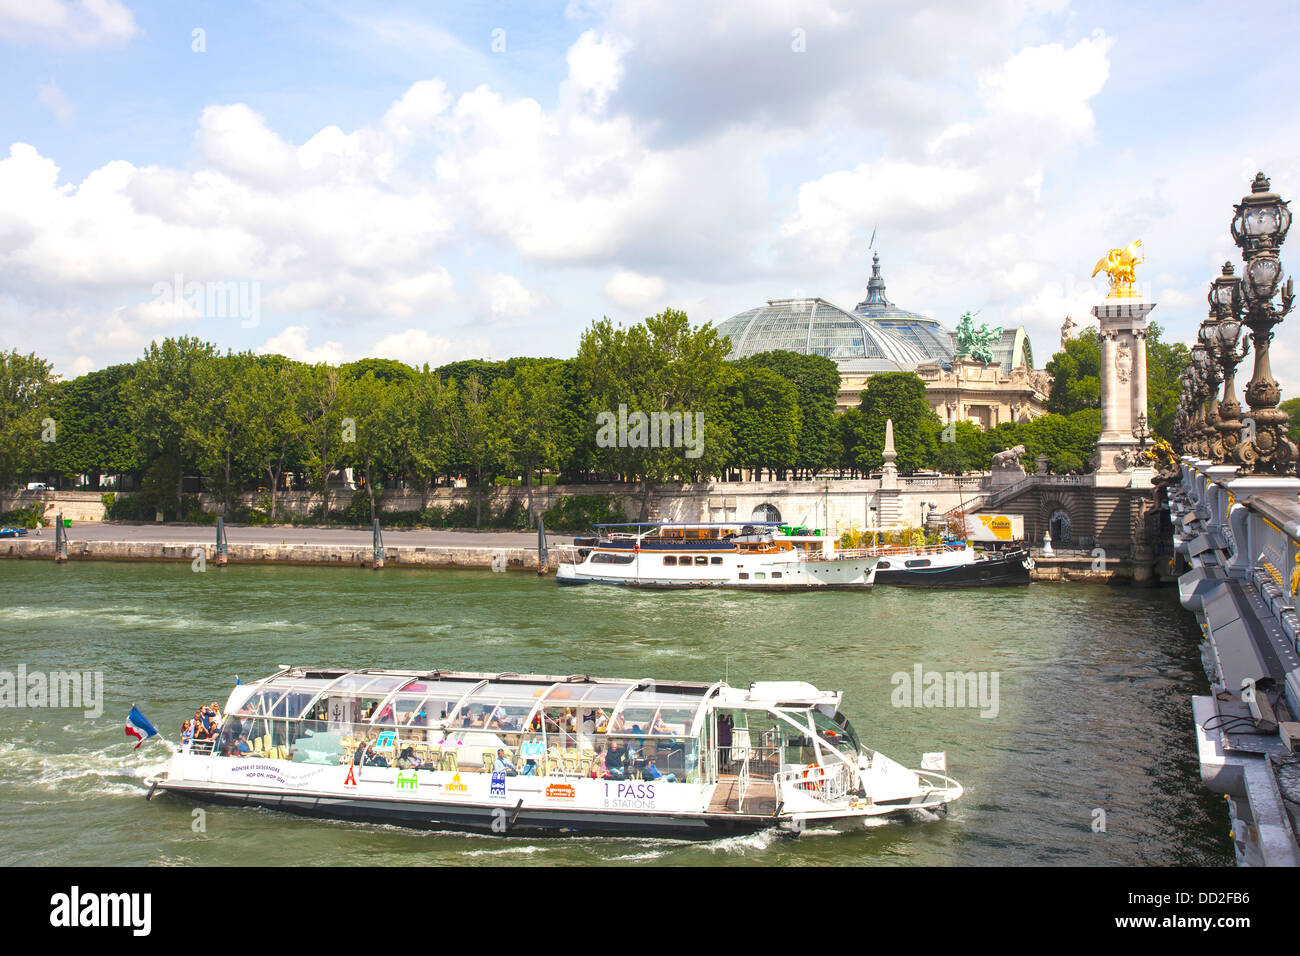 Bateaux Mouches - open excursion boats provide visitors to Paris, France with a view of the city from along the river Seine Stock Photo